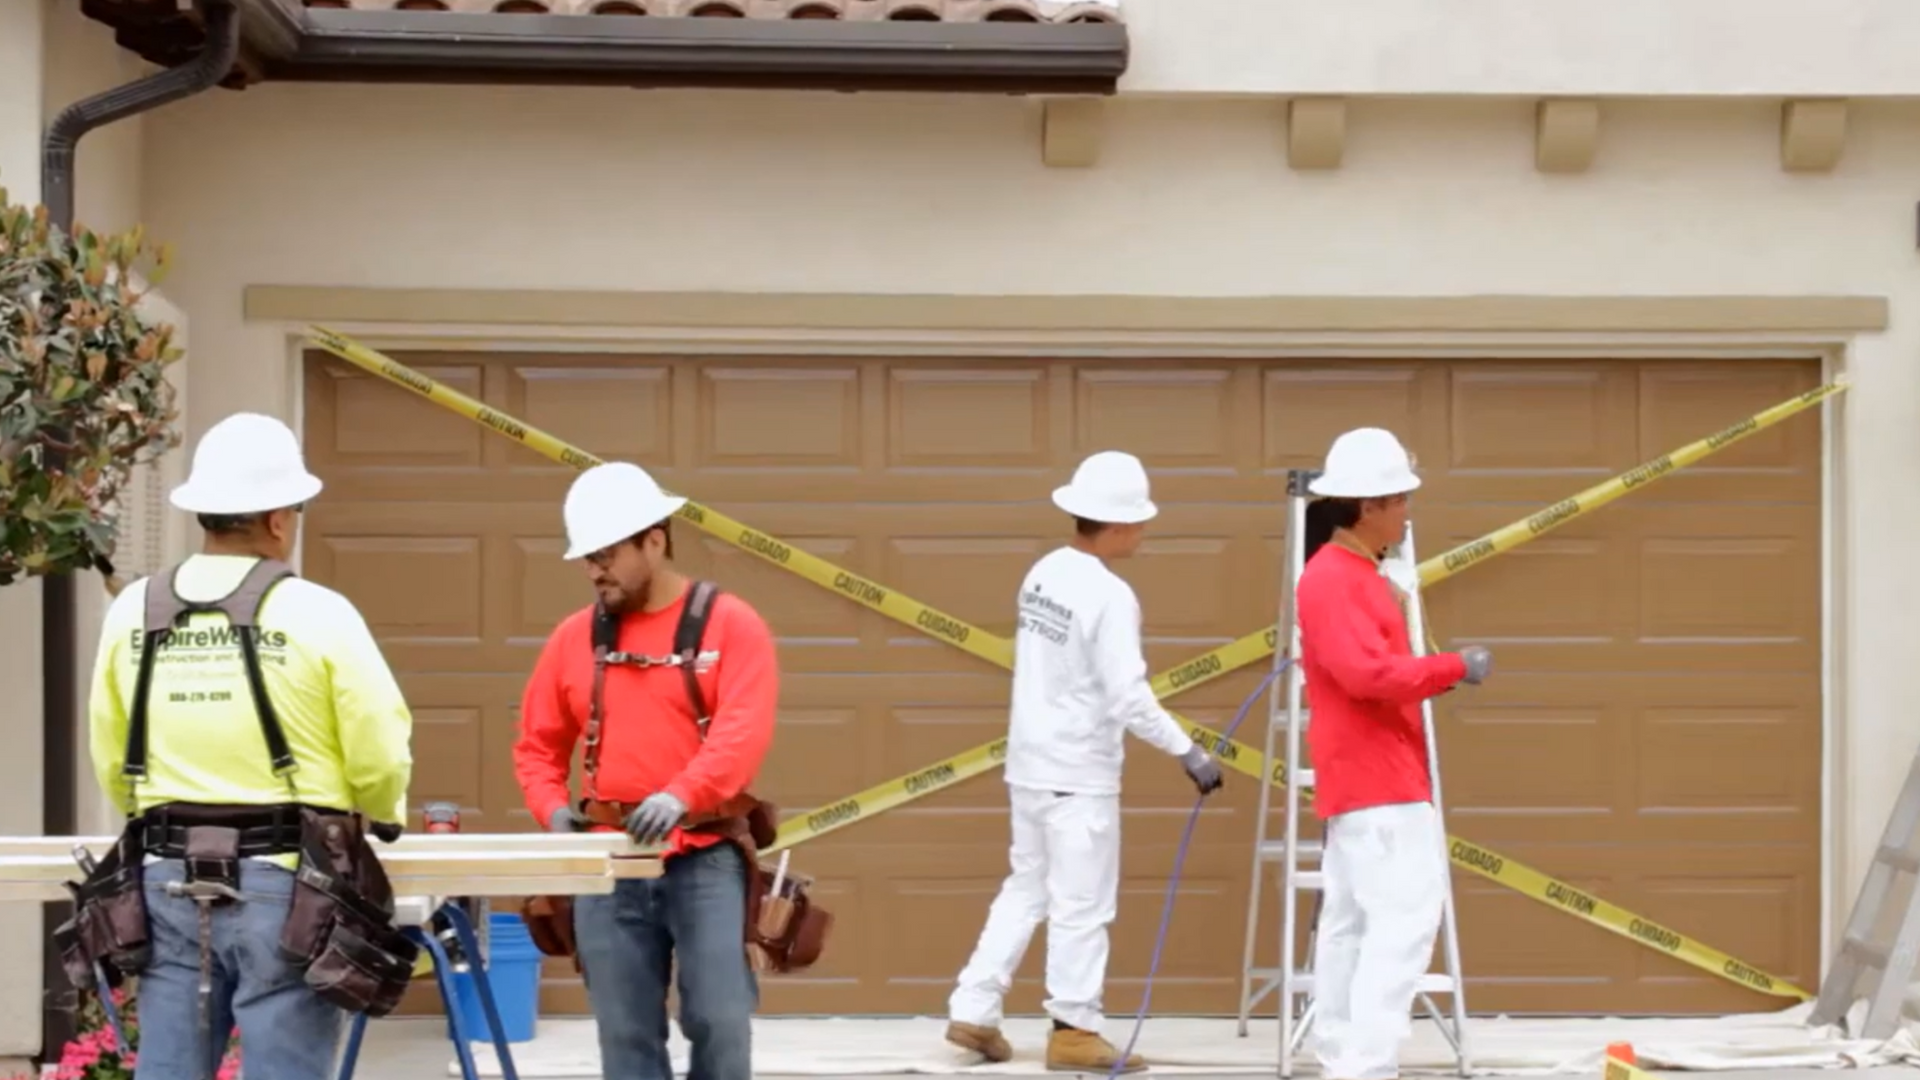 A group of construction workers are working on a garage door.